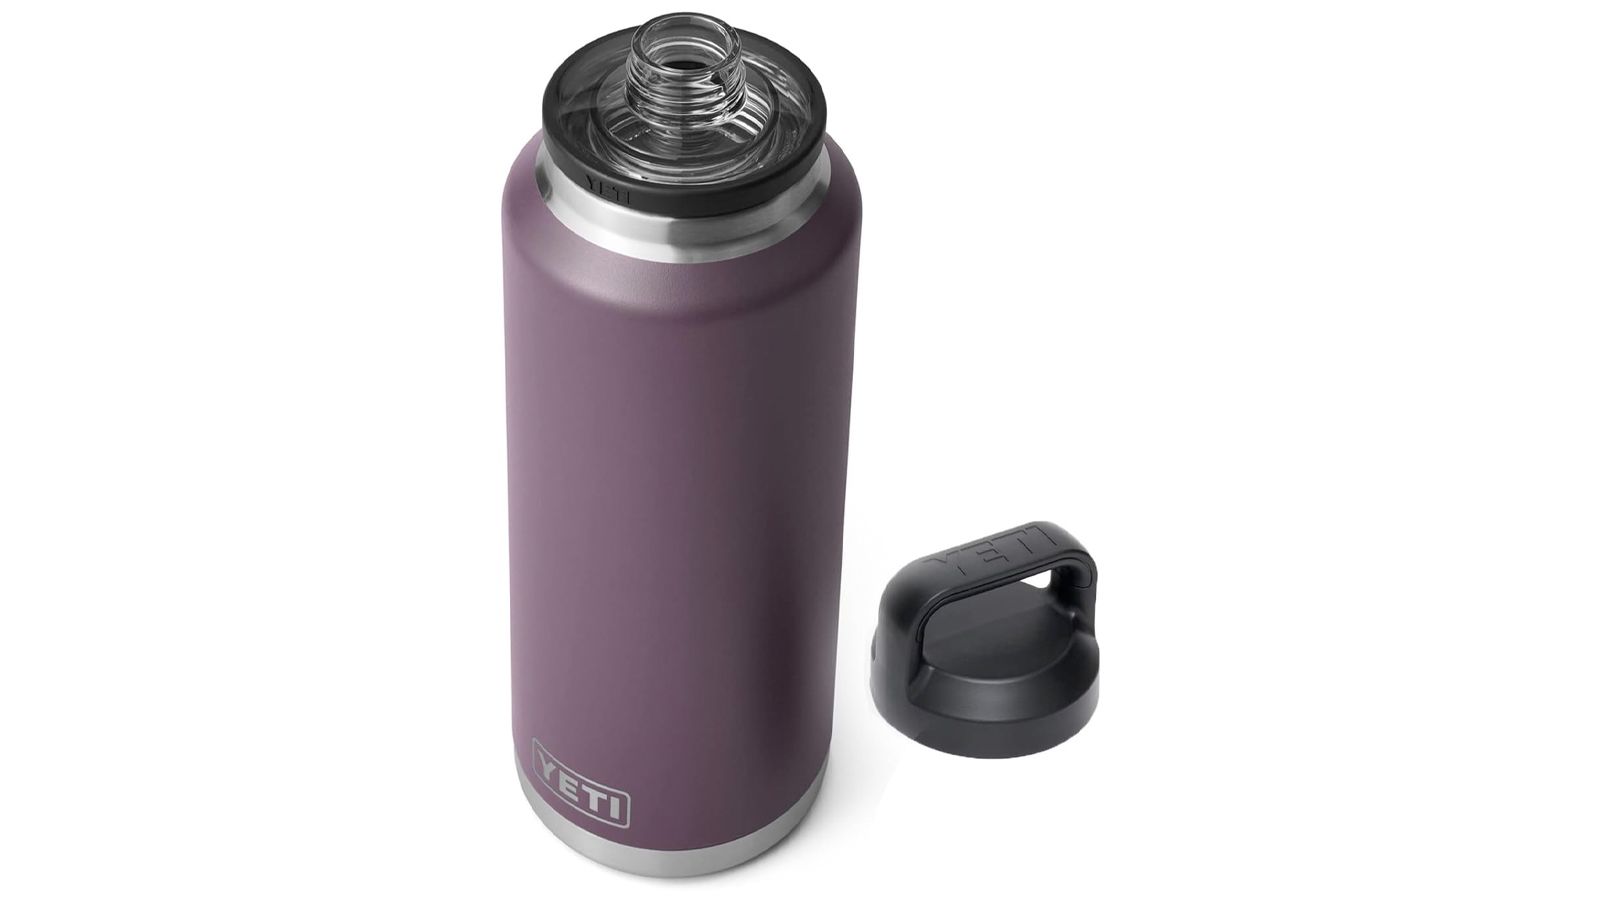 Yeti Black Friday Deals 2023: Take Up to 20% off Coolers, Tumblers